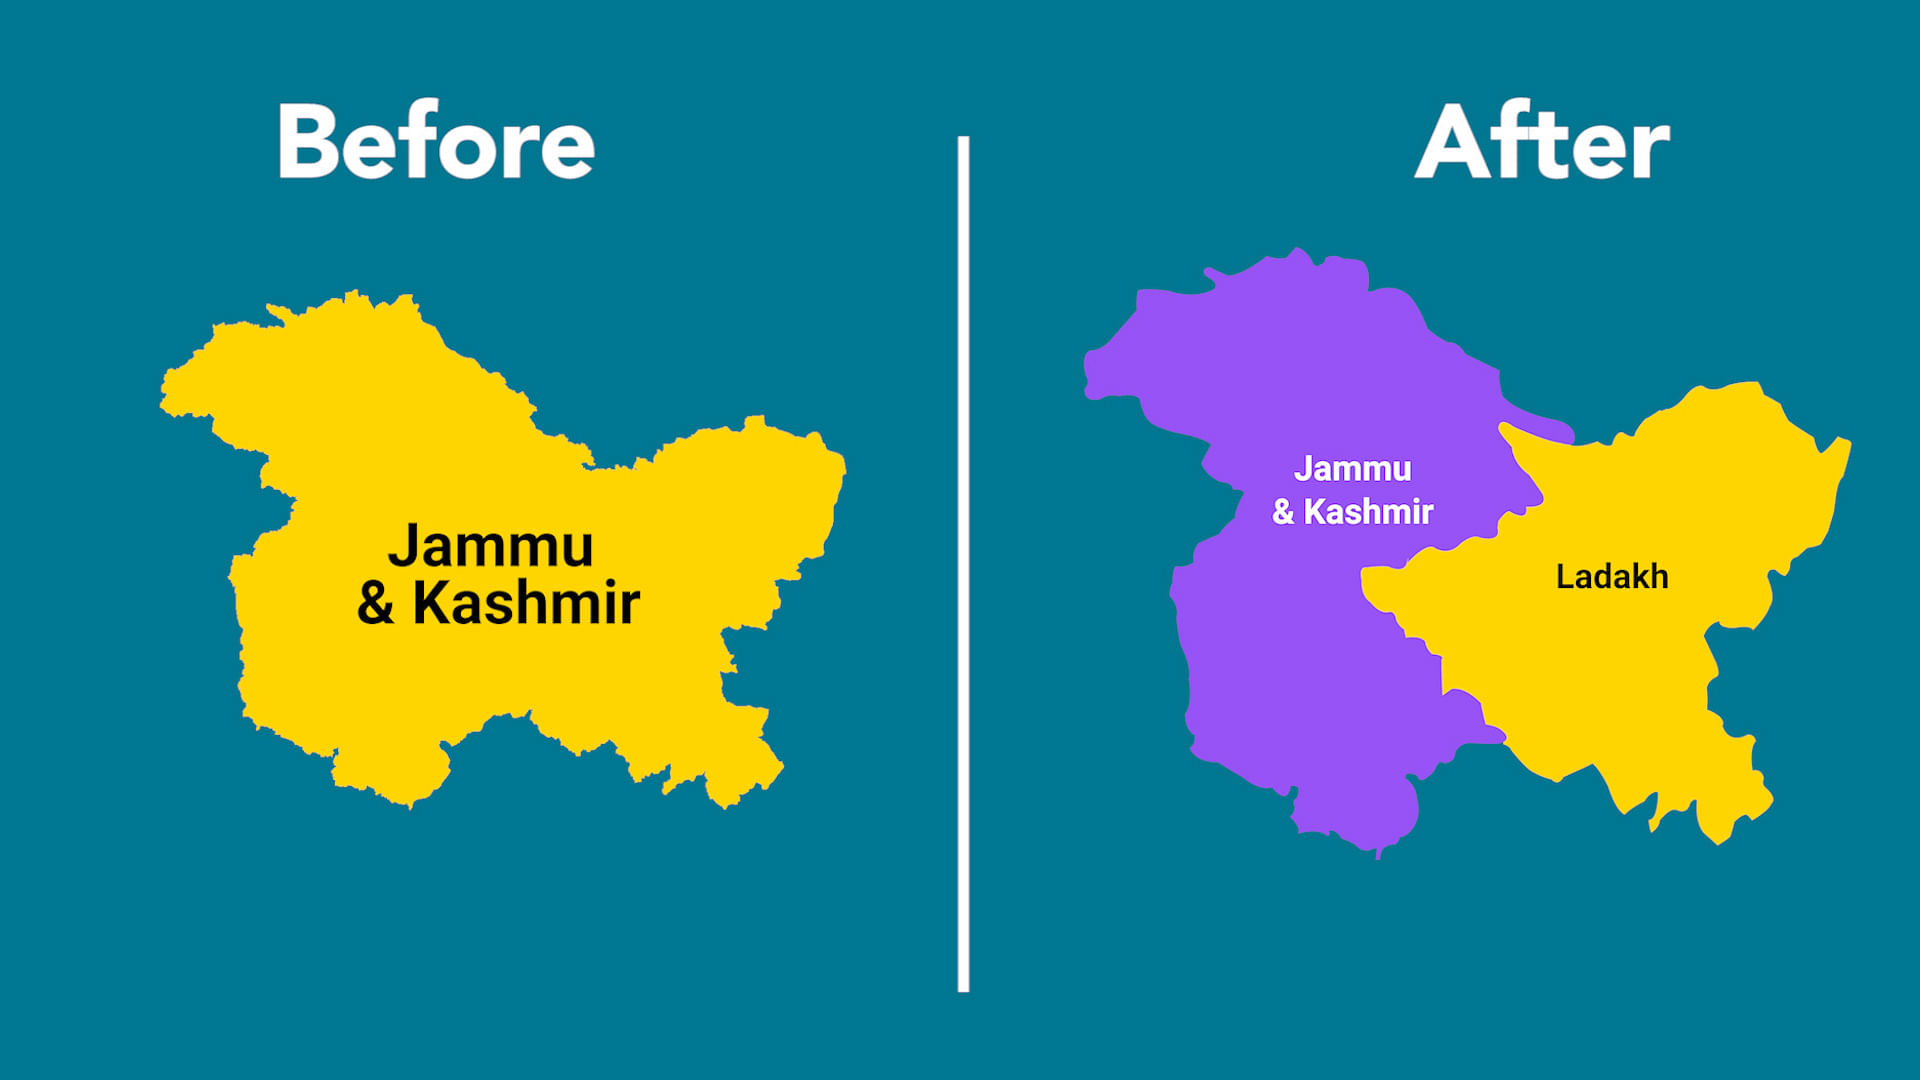 J&amp;K, before and after.